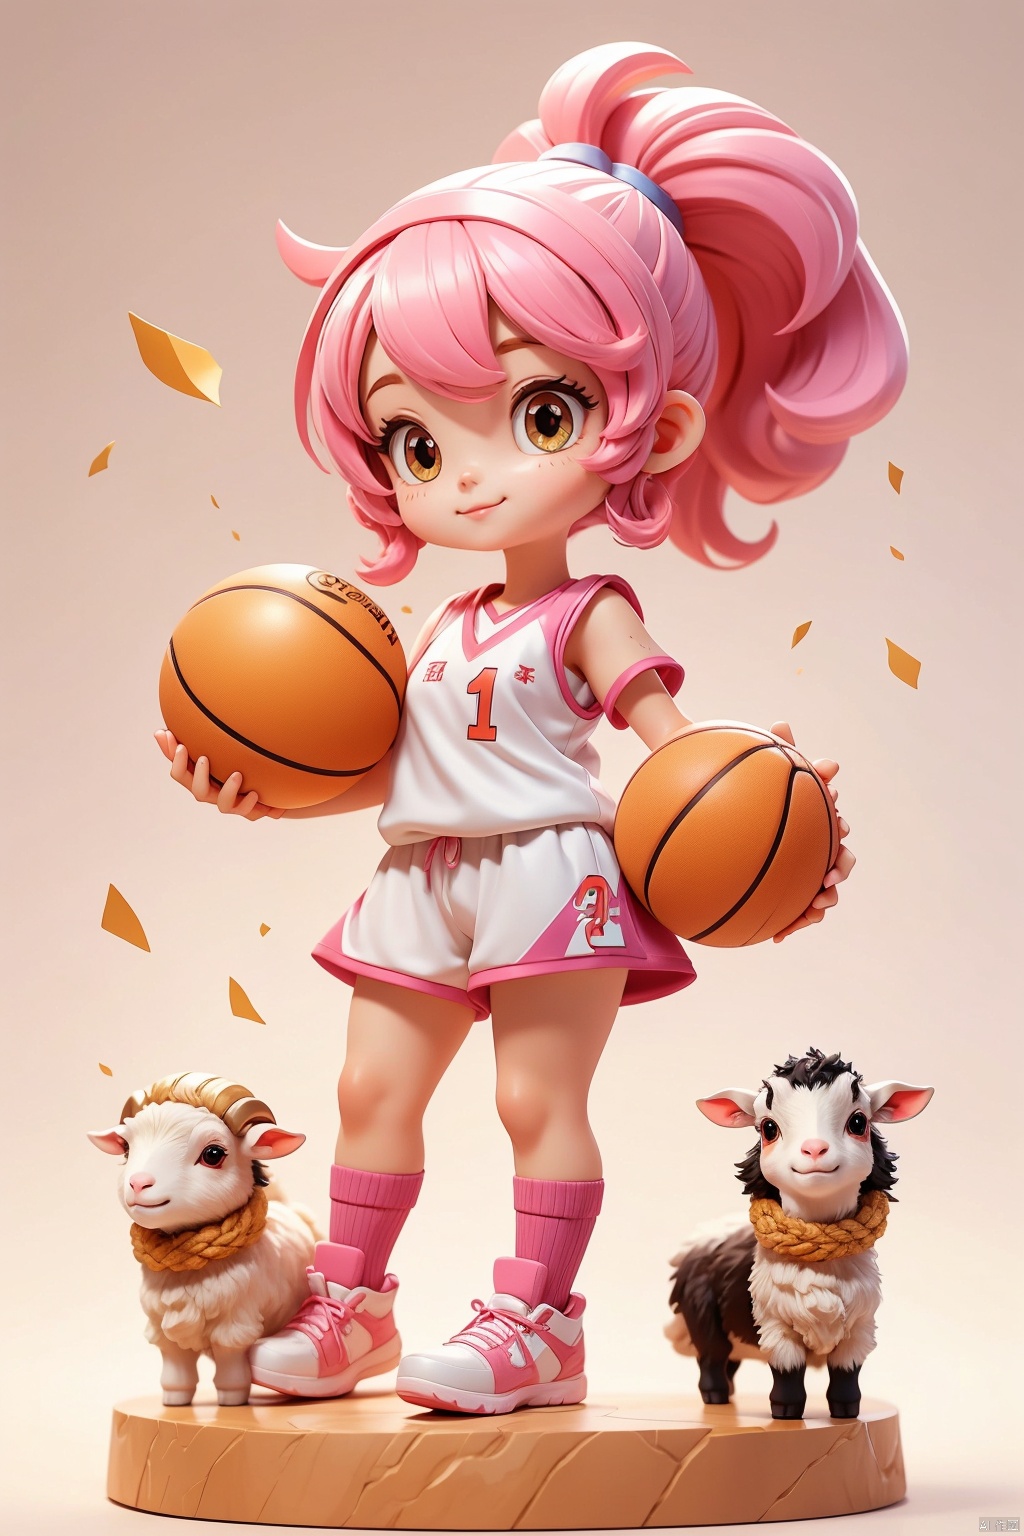 1 little girl, Animal IP, solo, (Q version :1.2), determined expression, goat horns, sheep tail, blush, basketball uniform, athlete figure, simple white background, pink hair, high ponytail, hands crossed